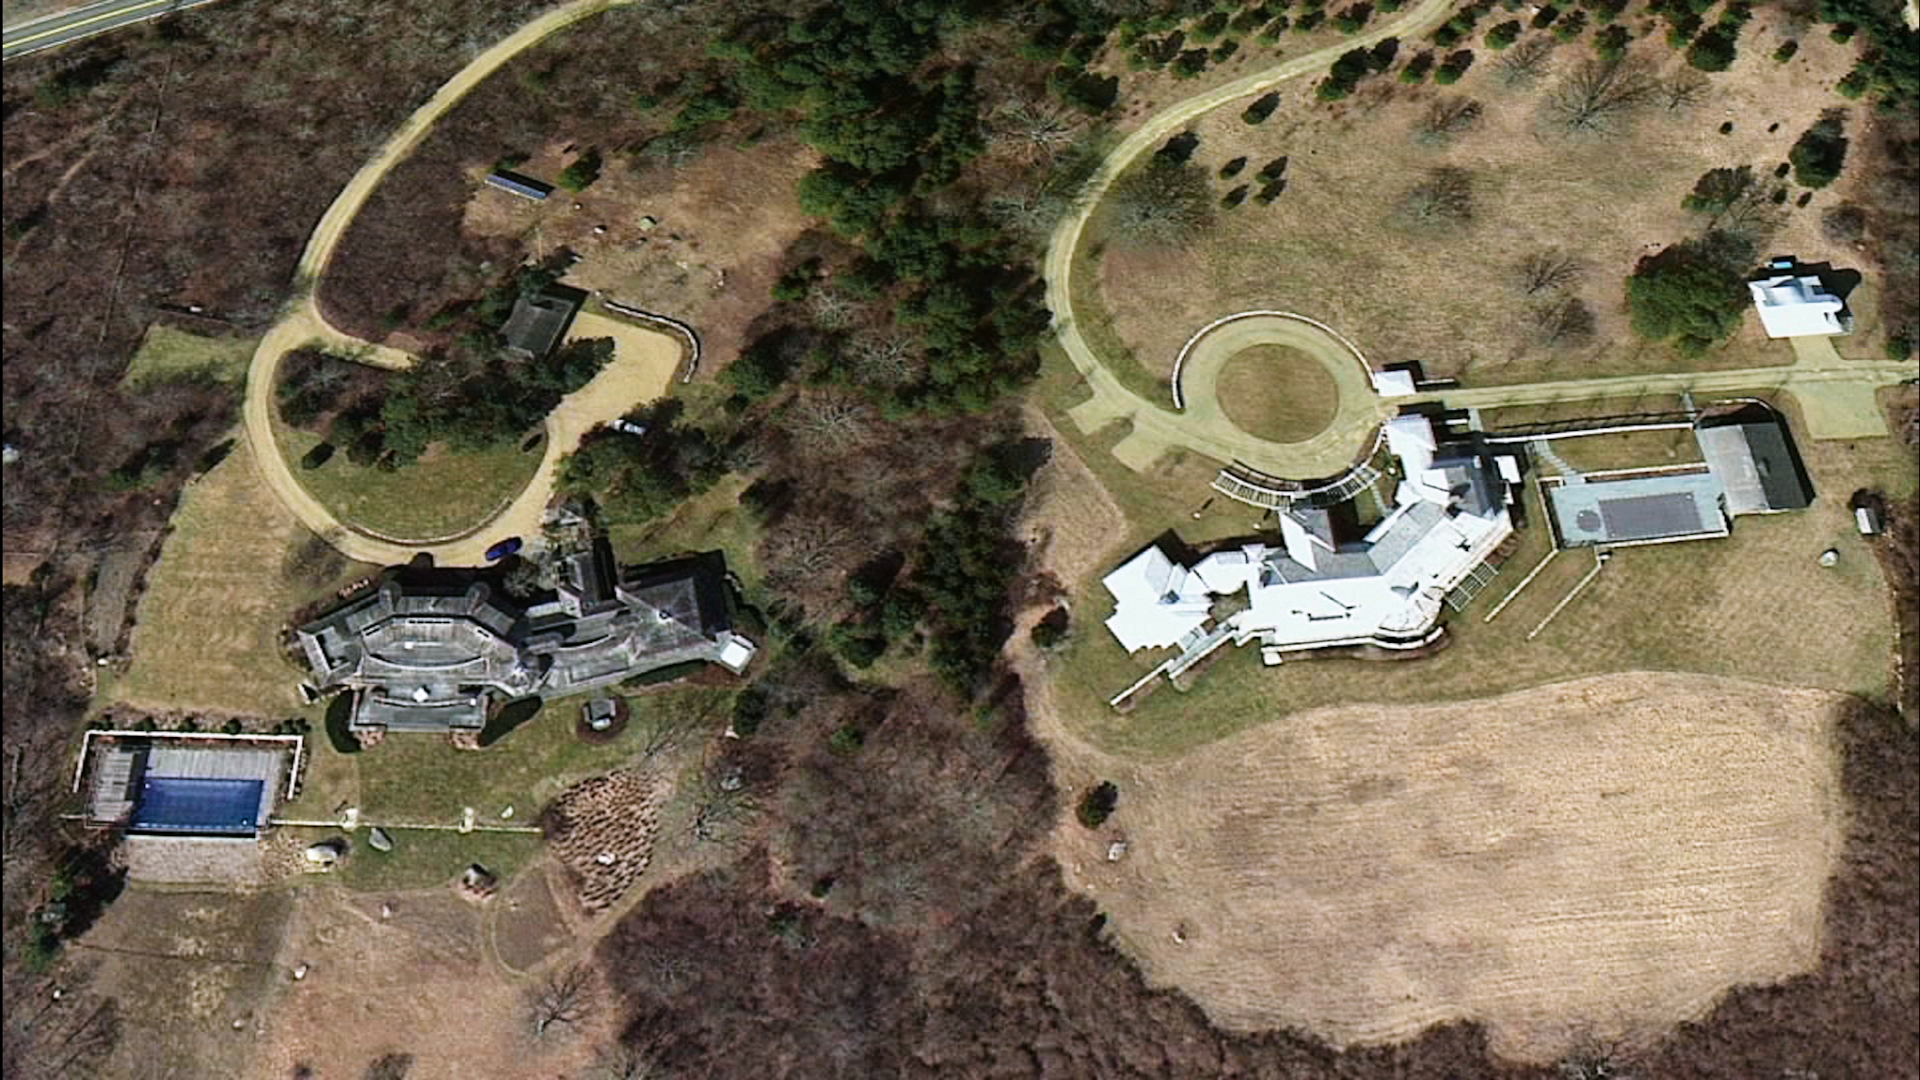 Google Earth imagery of mansions on Martha's Vineyard